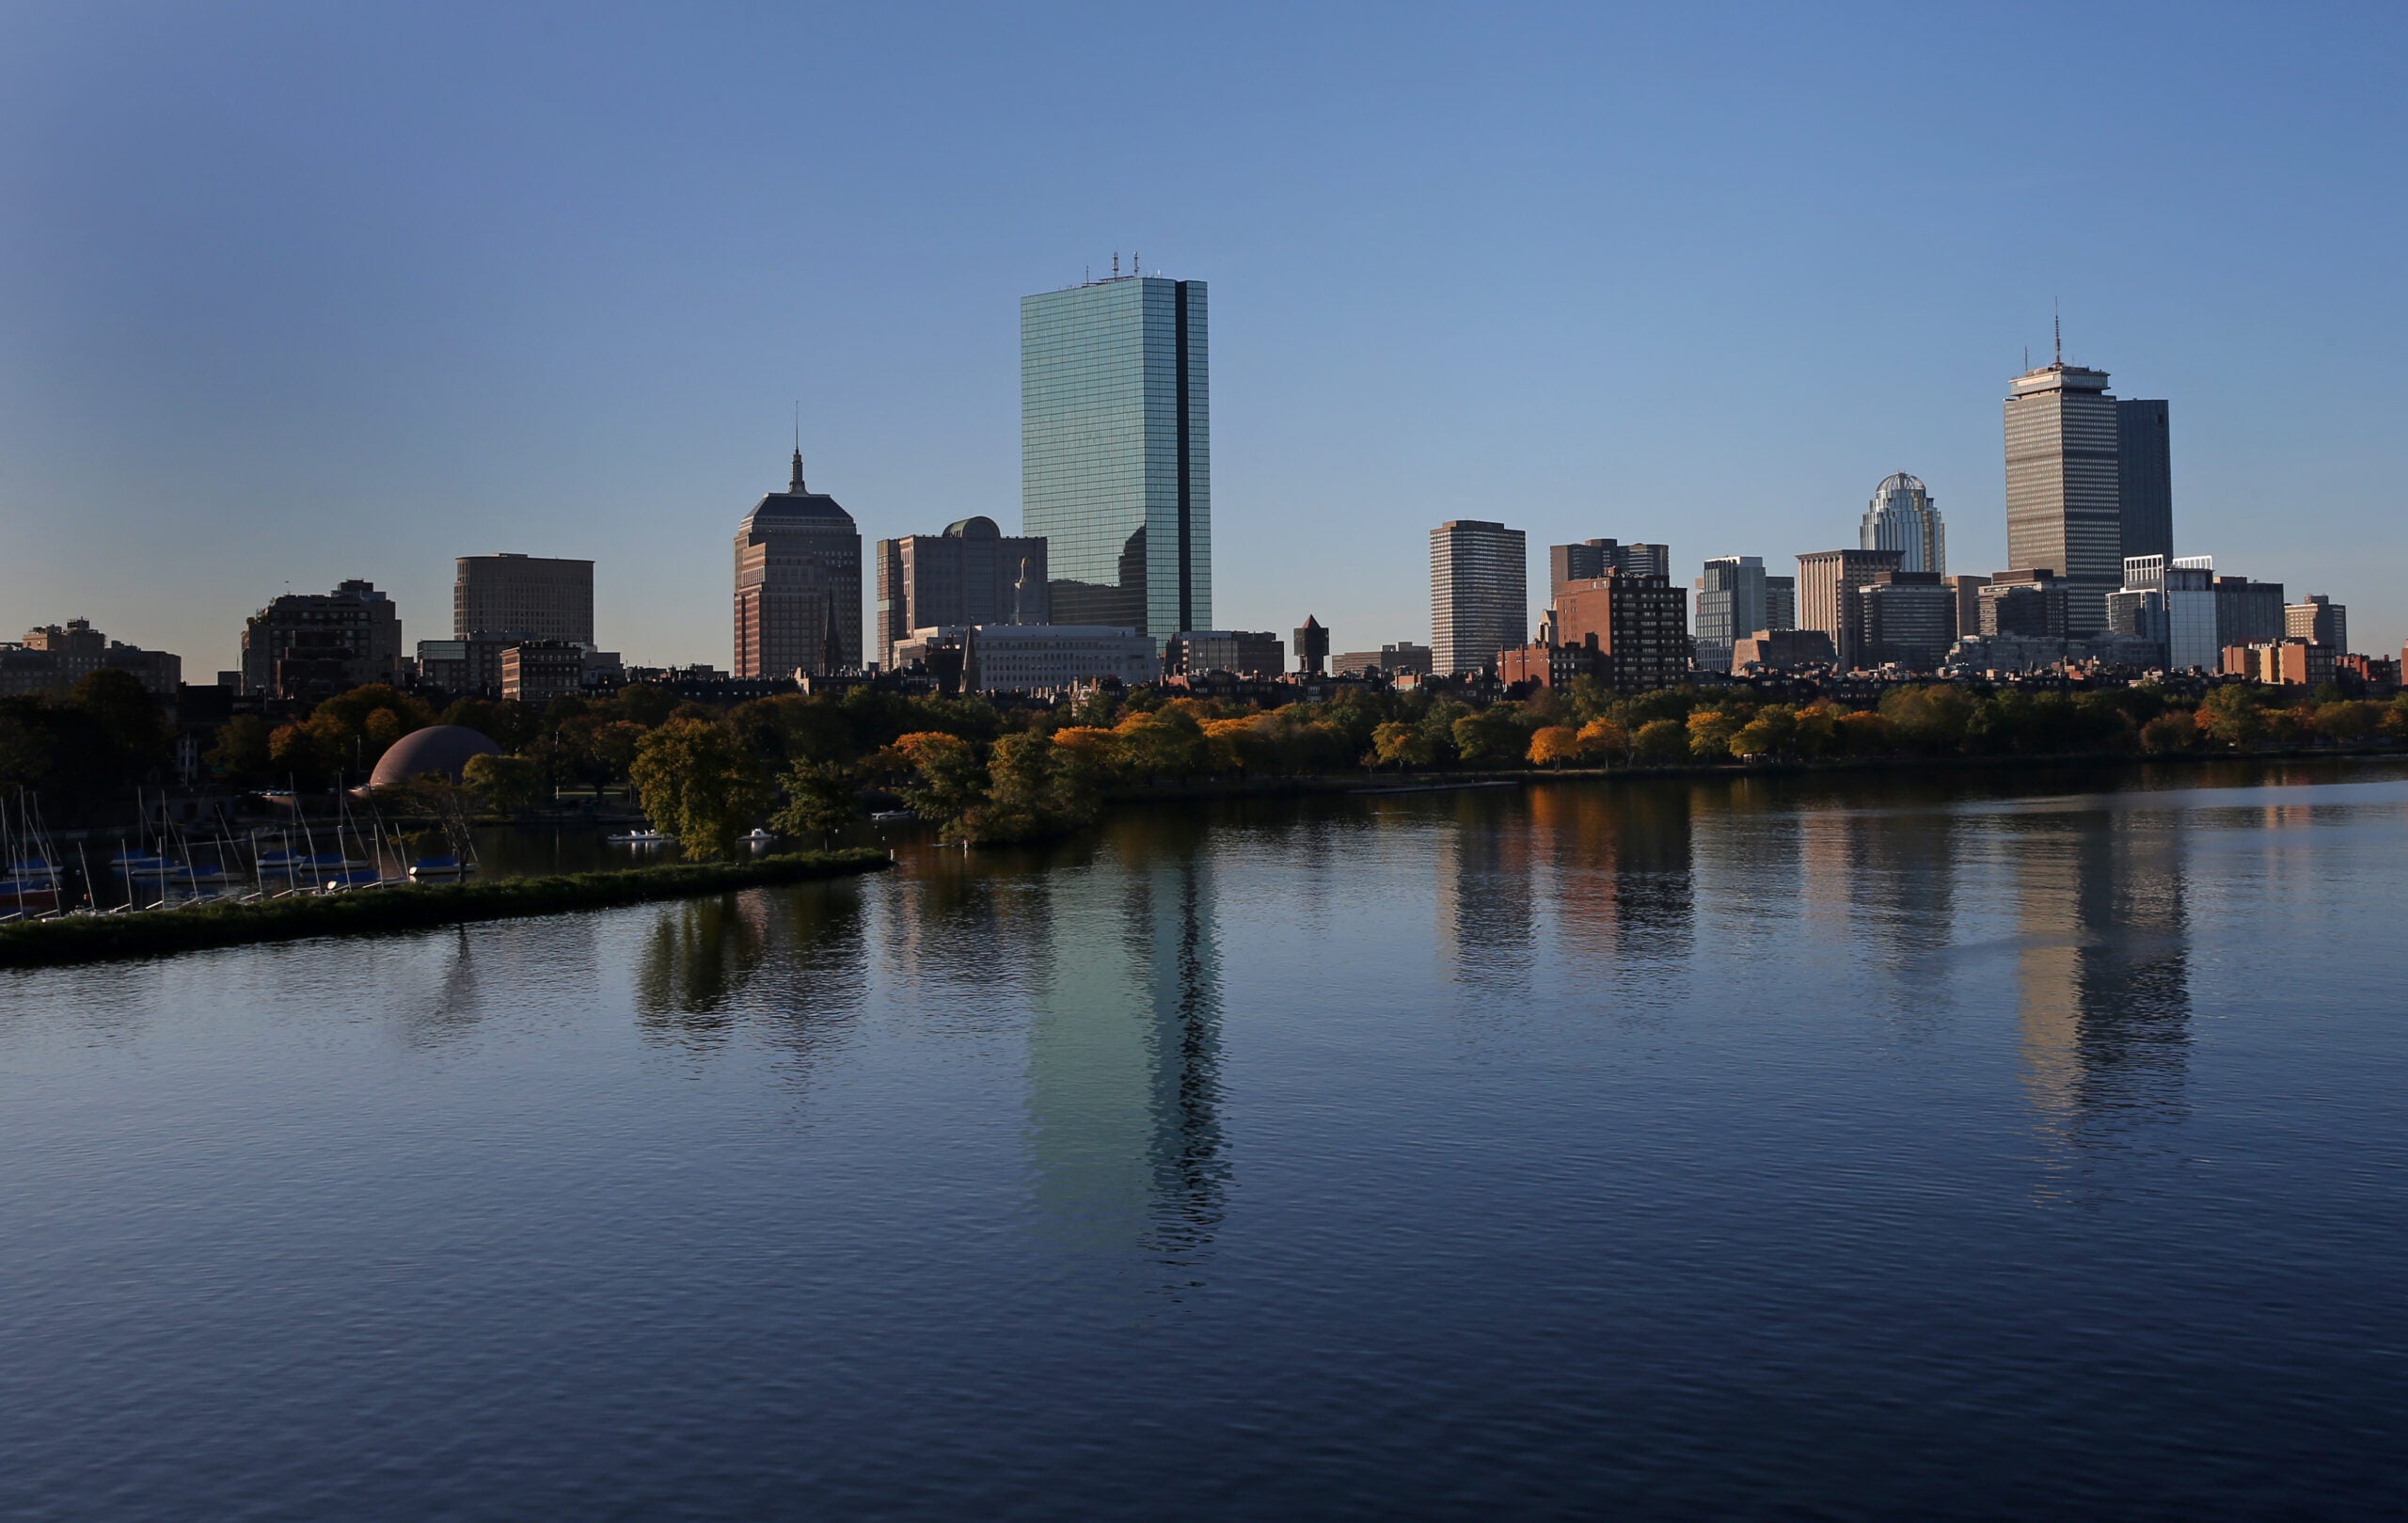 Our beautiful, boring Charles River - The Boston Globe